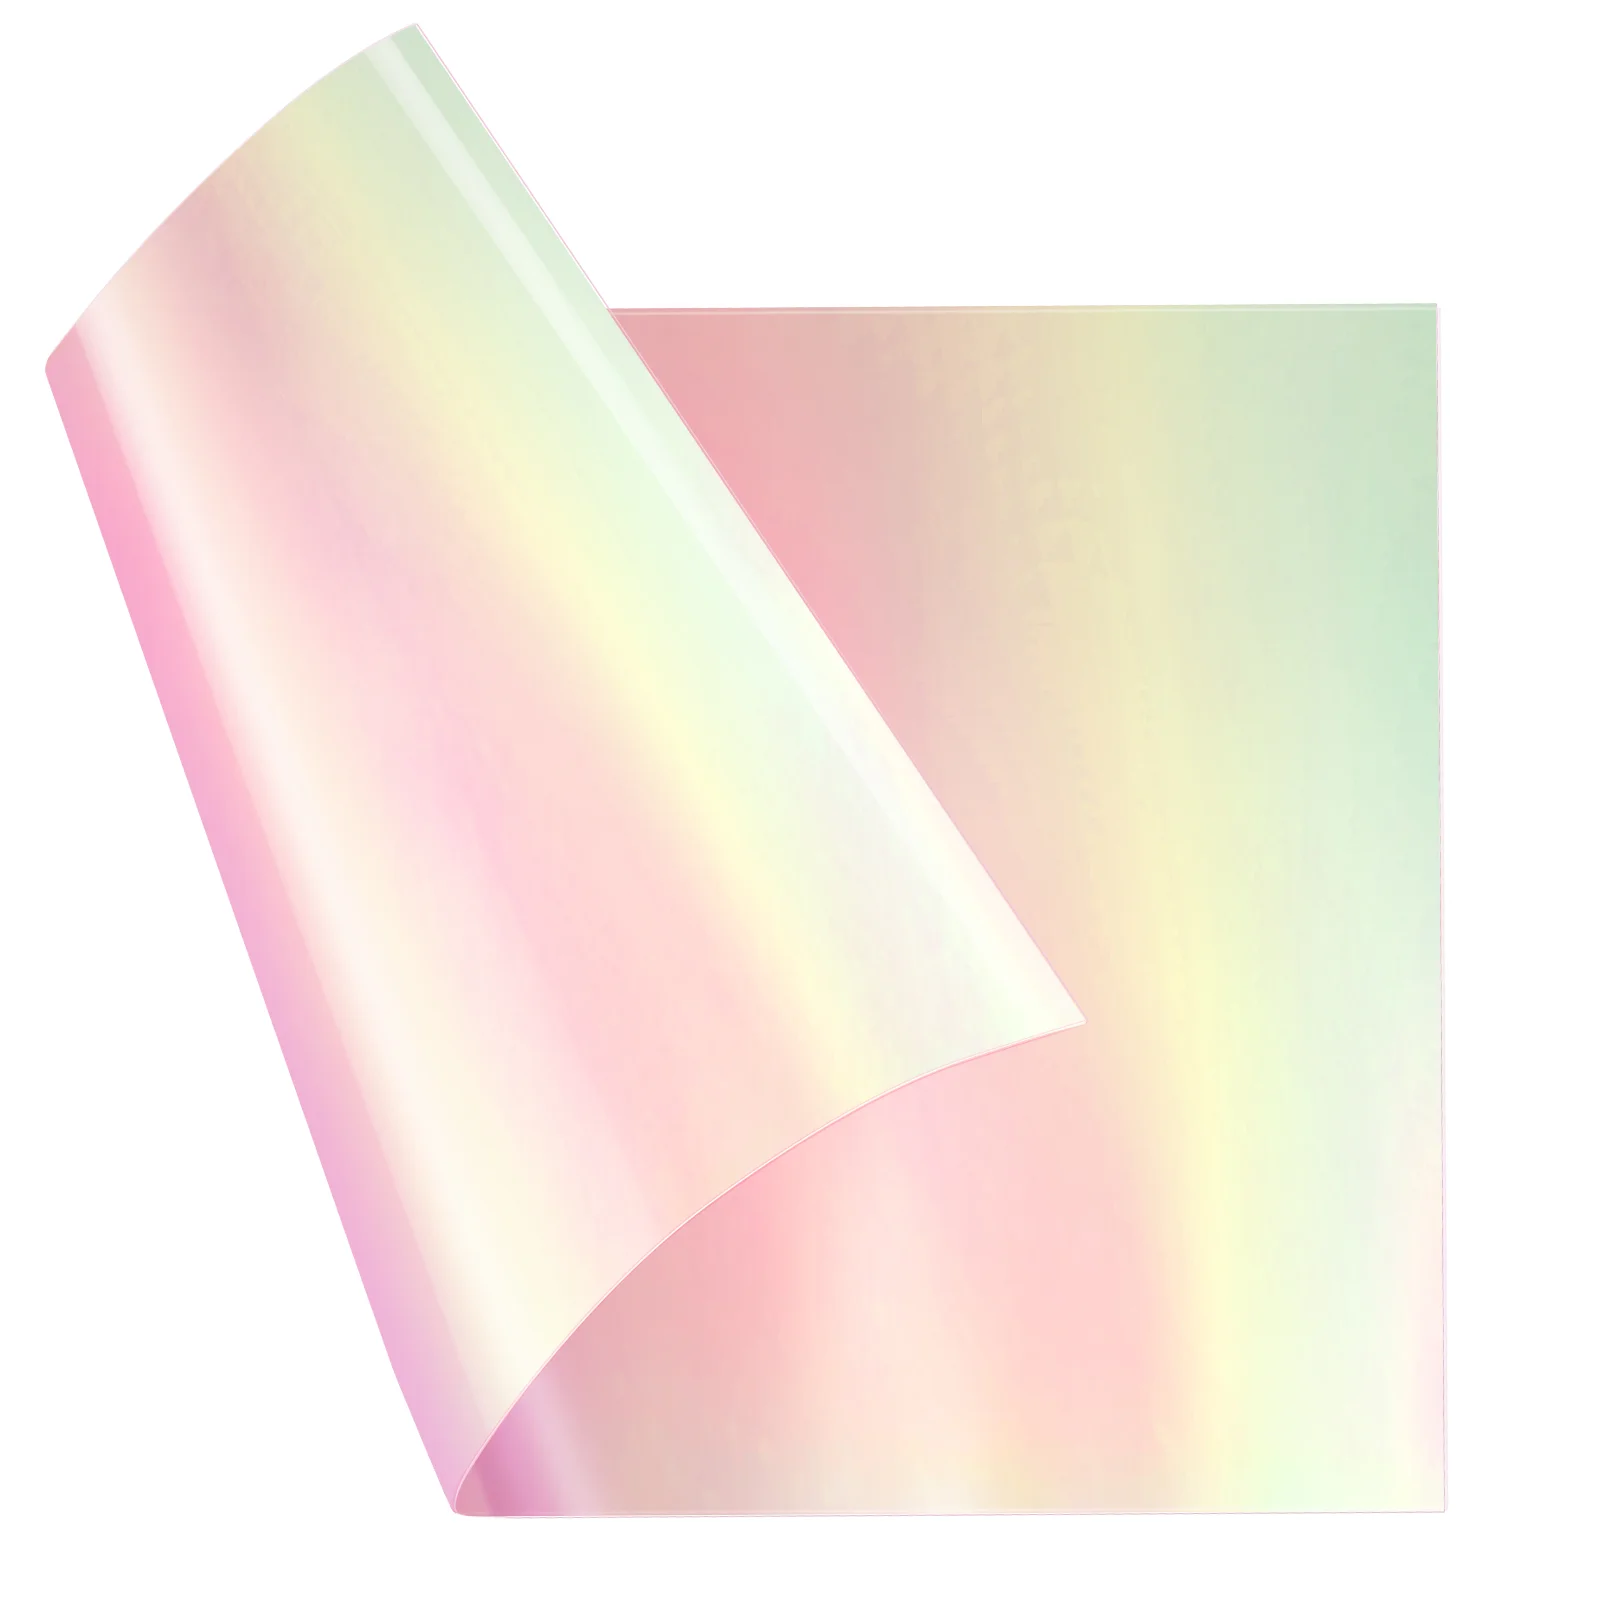 Stained Glass Window Film Cellophane Wrap Roll Iridescent Film Wrapping Paper Holographic Cellophane Pack Paper